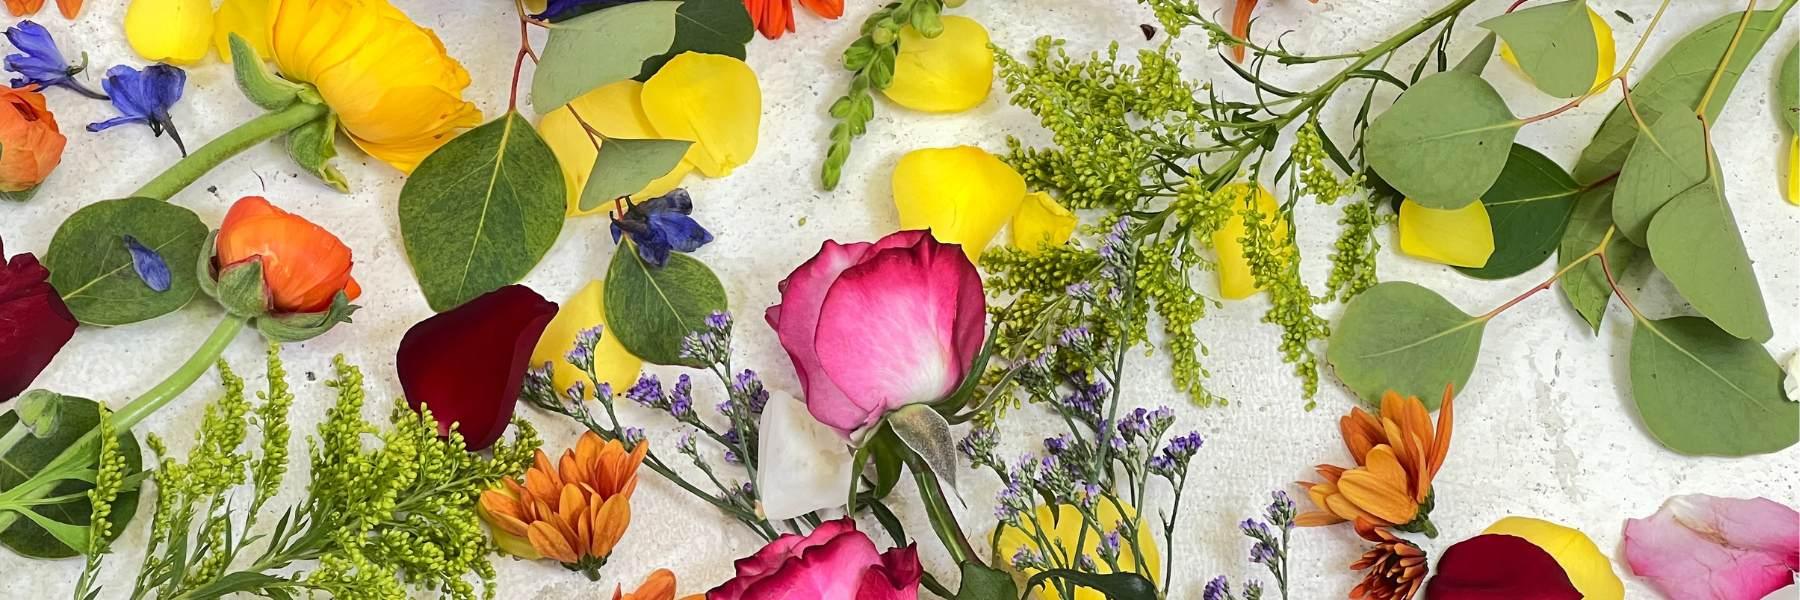 Master Tips from Botanists and Florists to Care for Fresh Cut Flowers - flatlay of flowers